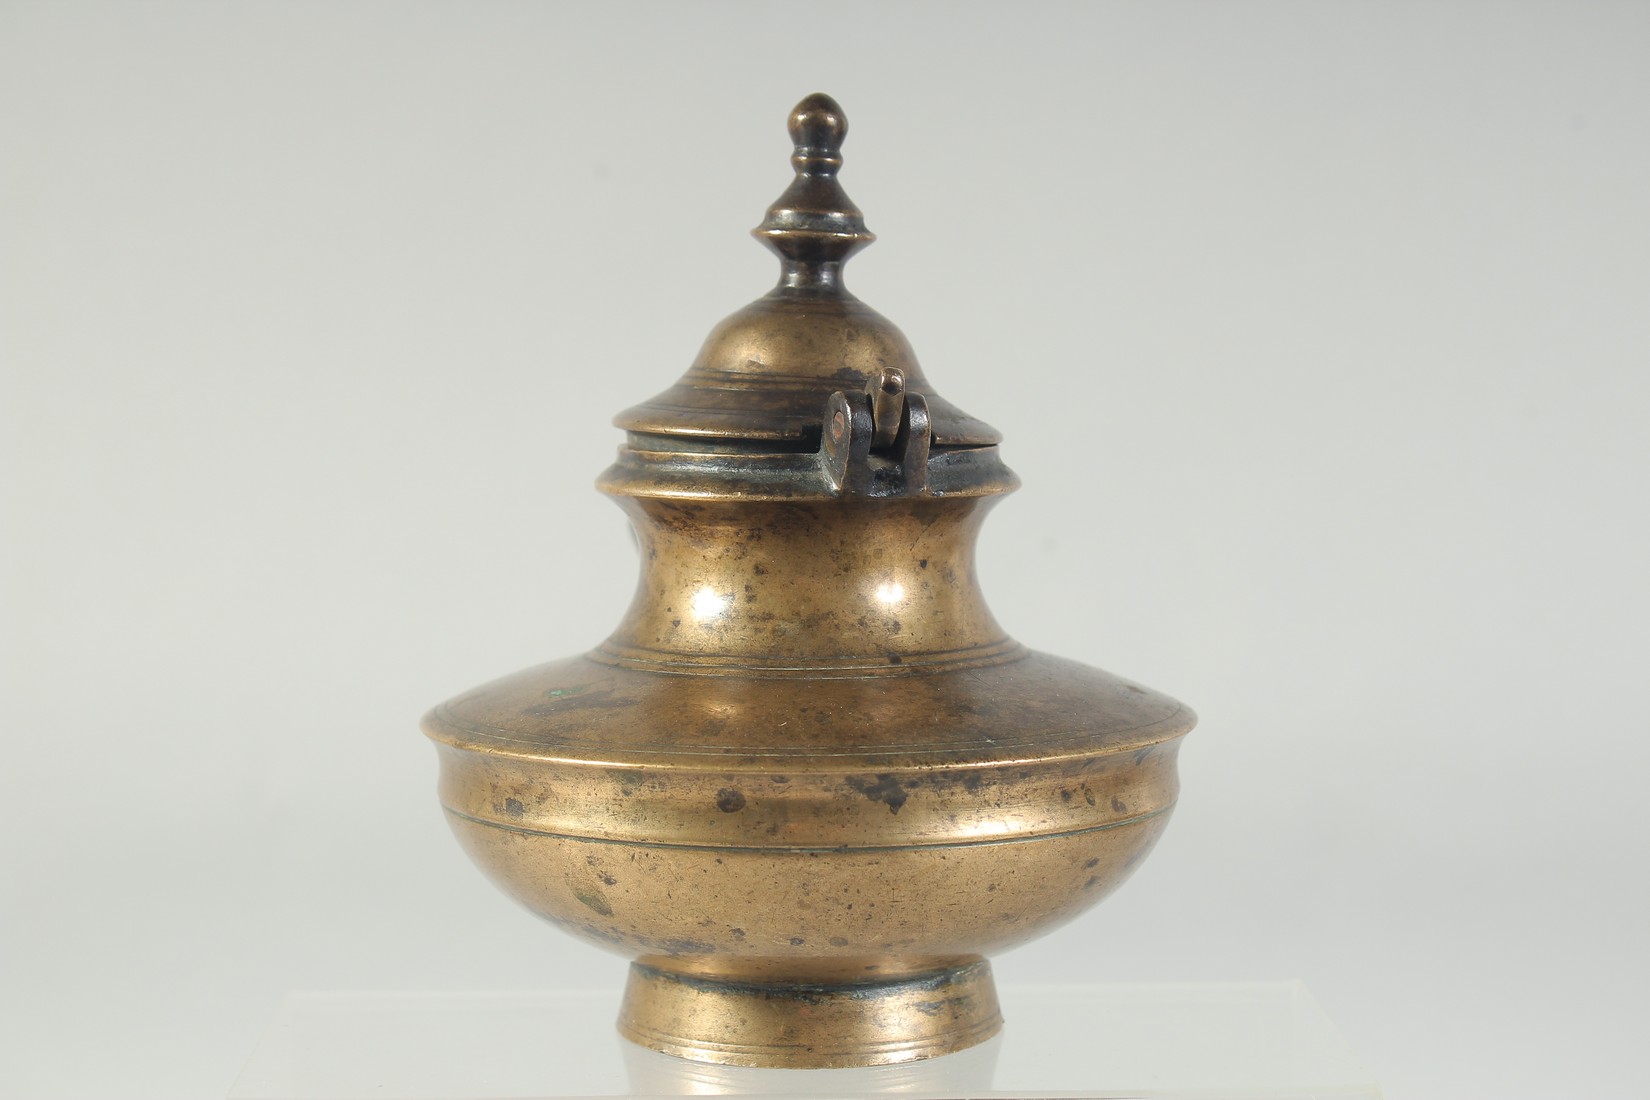 A 17TH-18TH CENTURY INDIAN BRASS SQUAT-FORM EWER, 17cm wide (including spout). - Image 4 of 6